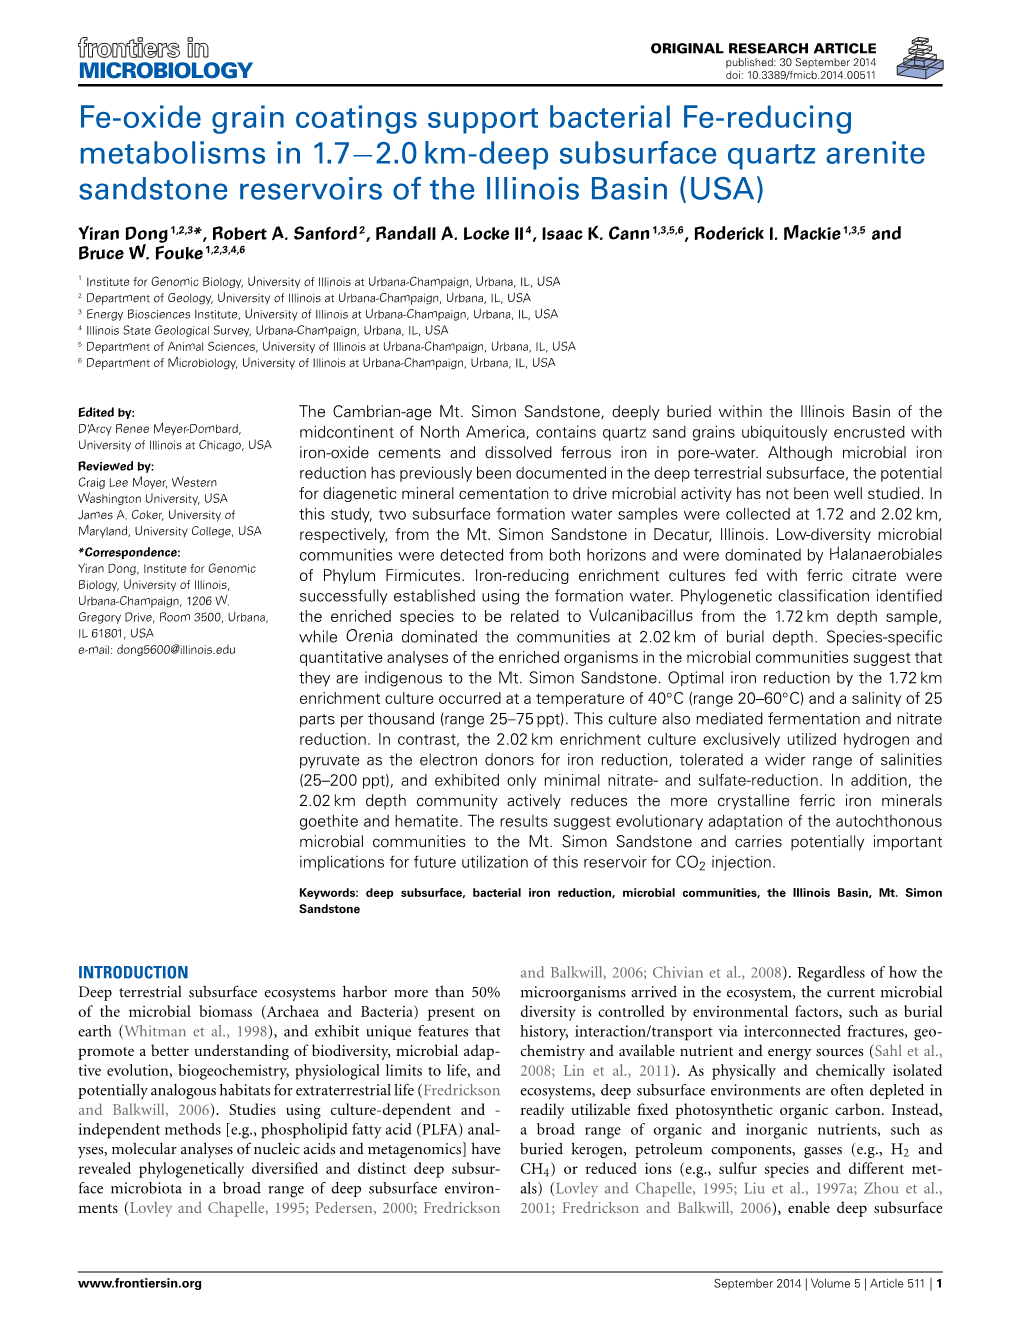 Fe-Oxide Grain Coatings Support Bacterial Fe-Reducing Metabolisms in 1.7−2.0 Km-Deep Subsurface Quartz Arenite Sandstone Reservoirs of the Illinois Basin (USA)